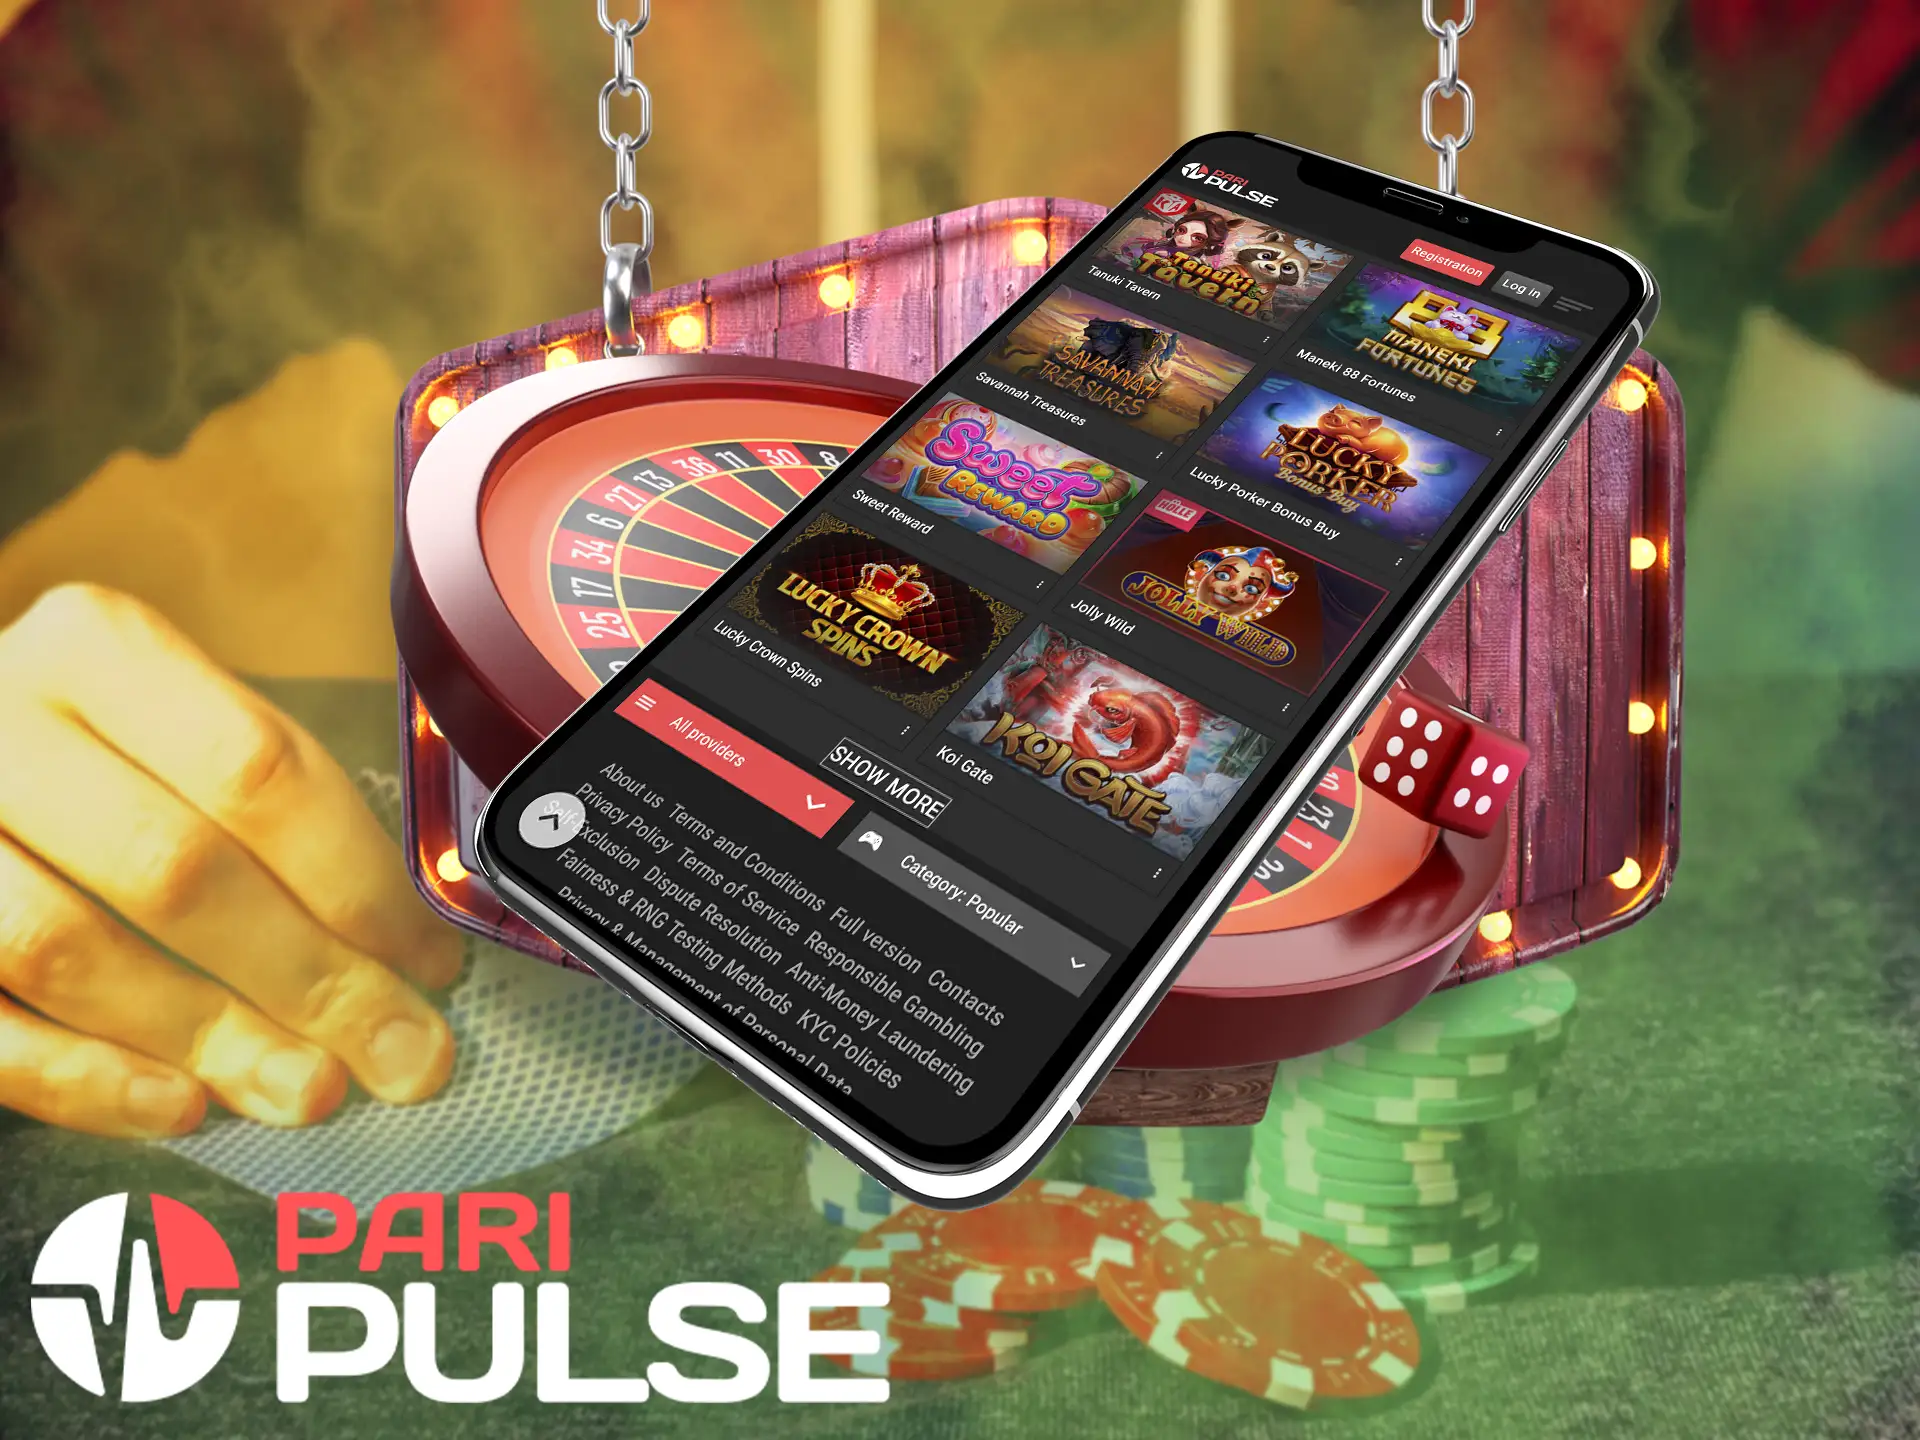 You will find only quality gambling entertainment only from proven suppliers in the app PariPulse.